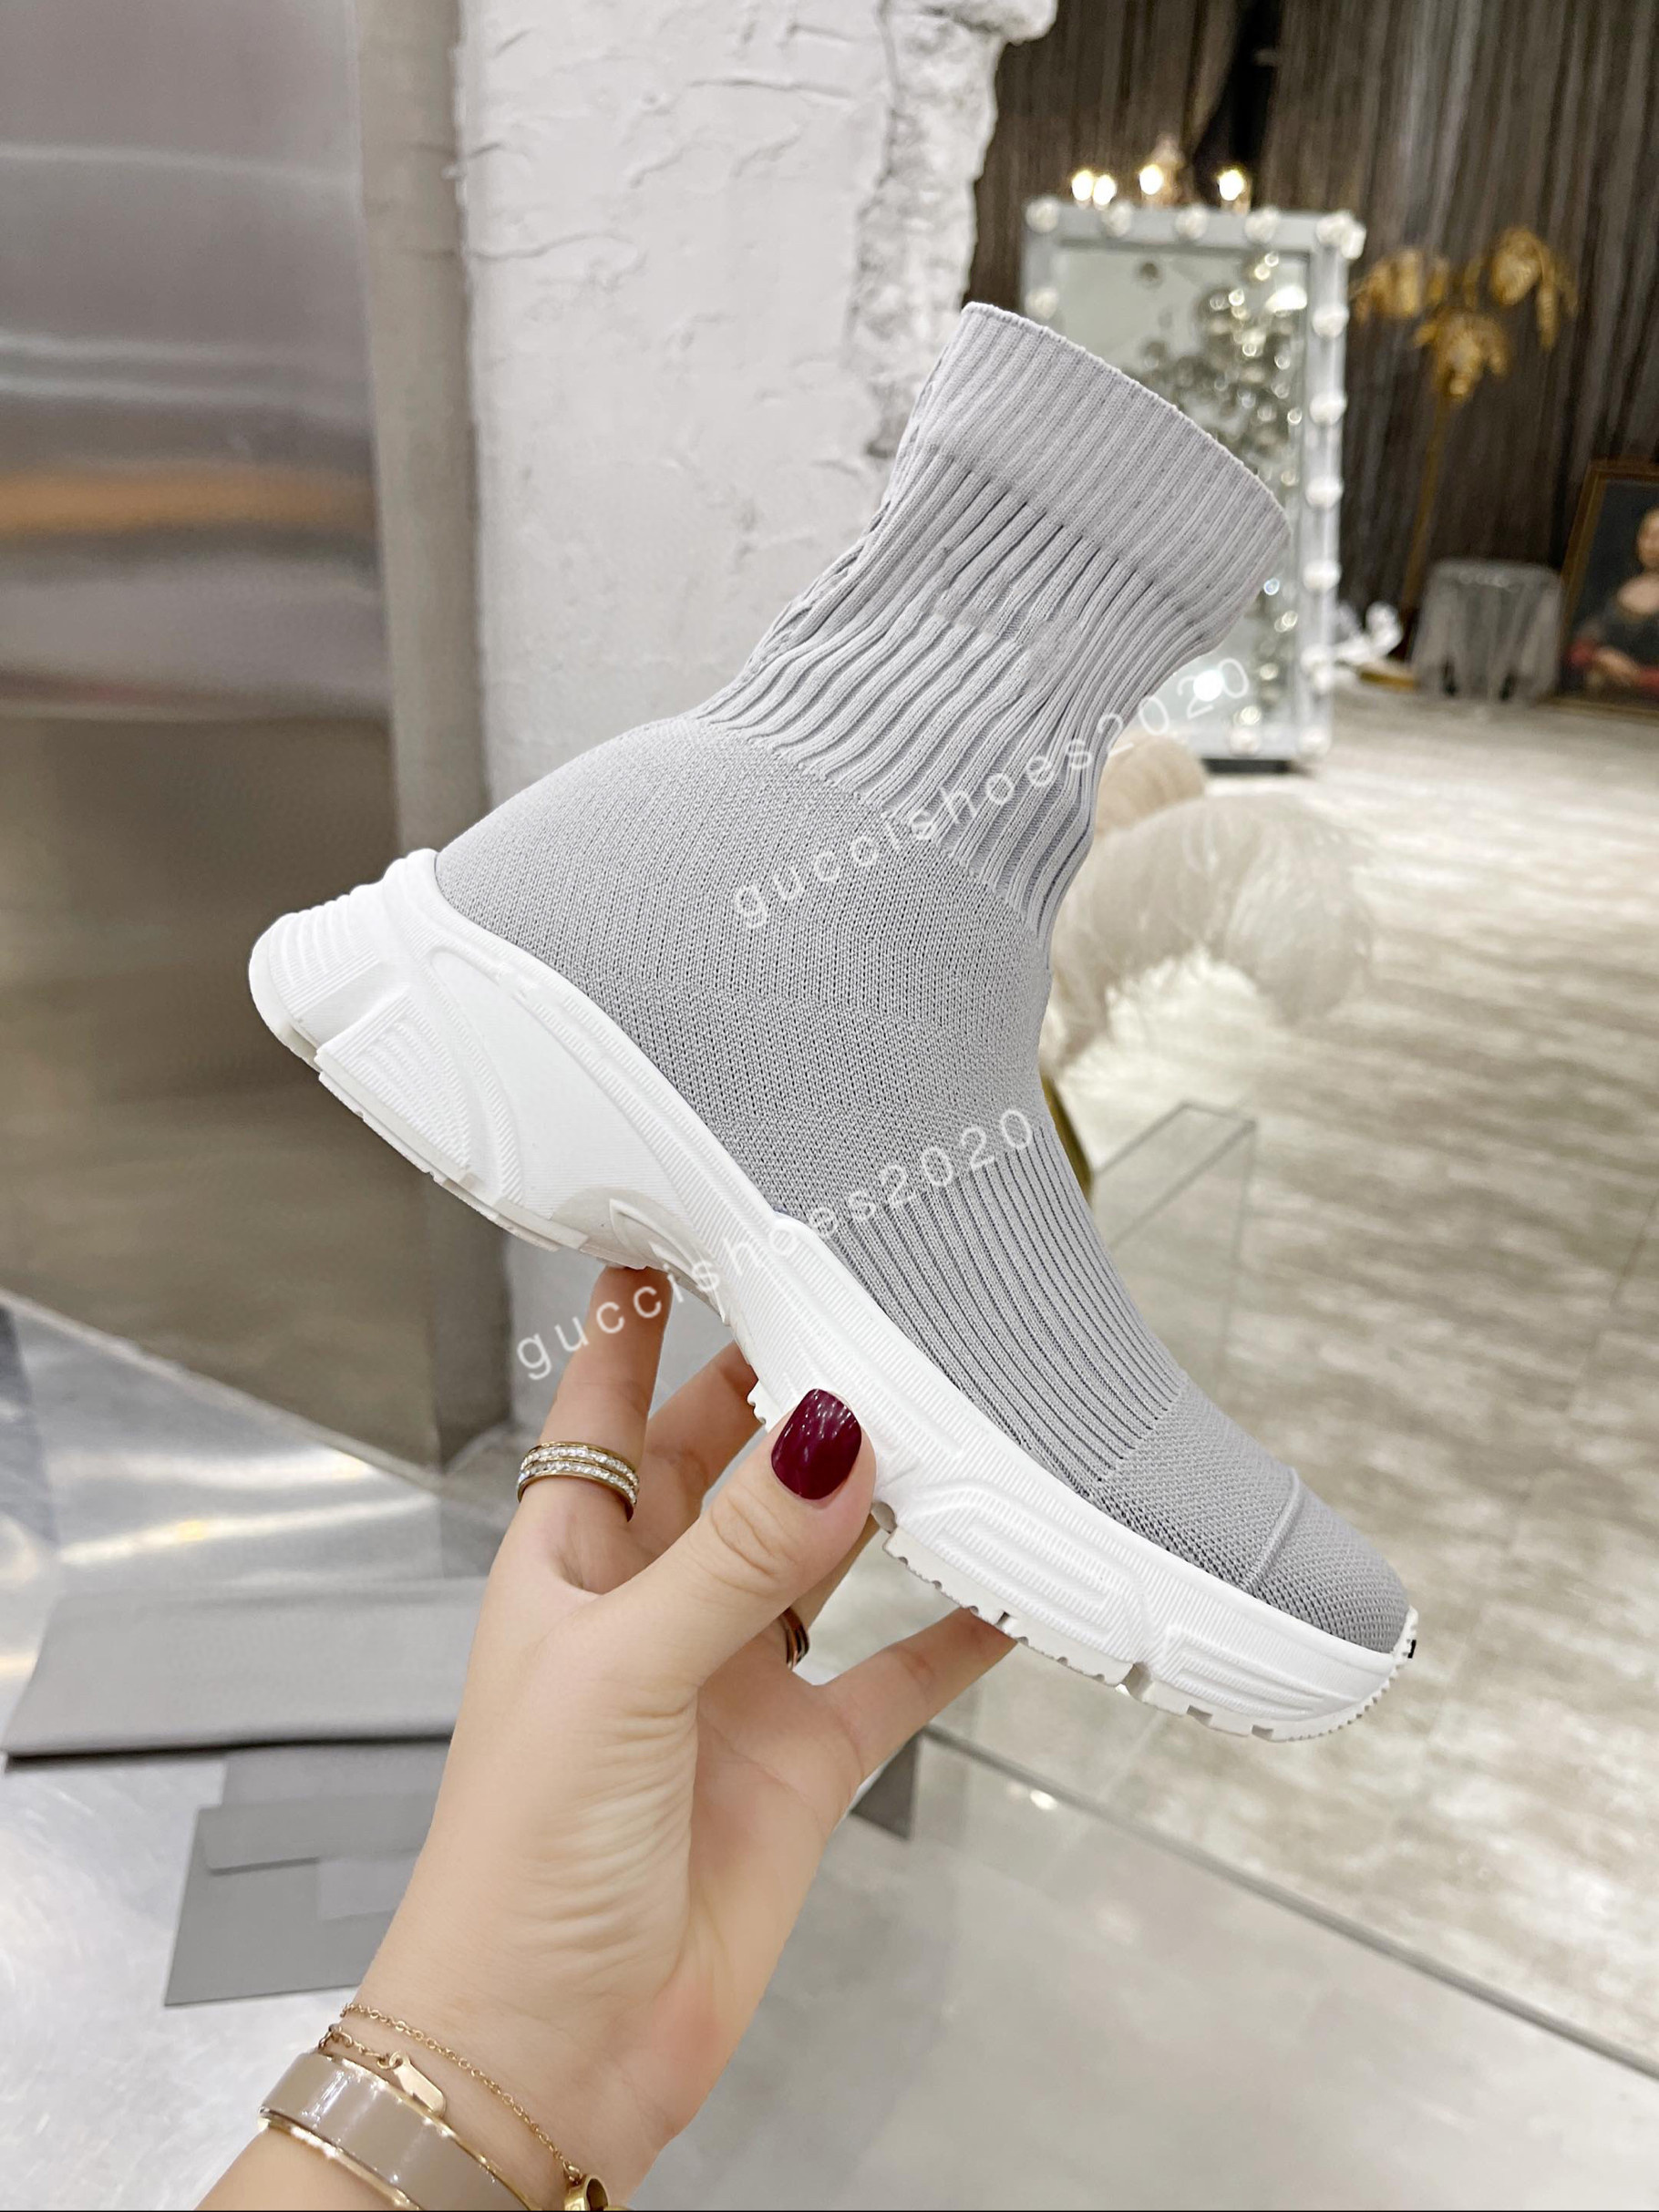 

Top Quality Designer Boots Socks Shoes Casual Paris Rainbow Fashion Sock Women Men The Hacker Project Hight Increasing Old Dad Trainers Sneakers size35-45, 01